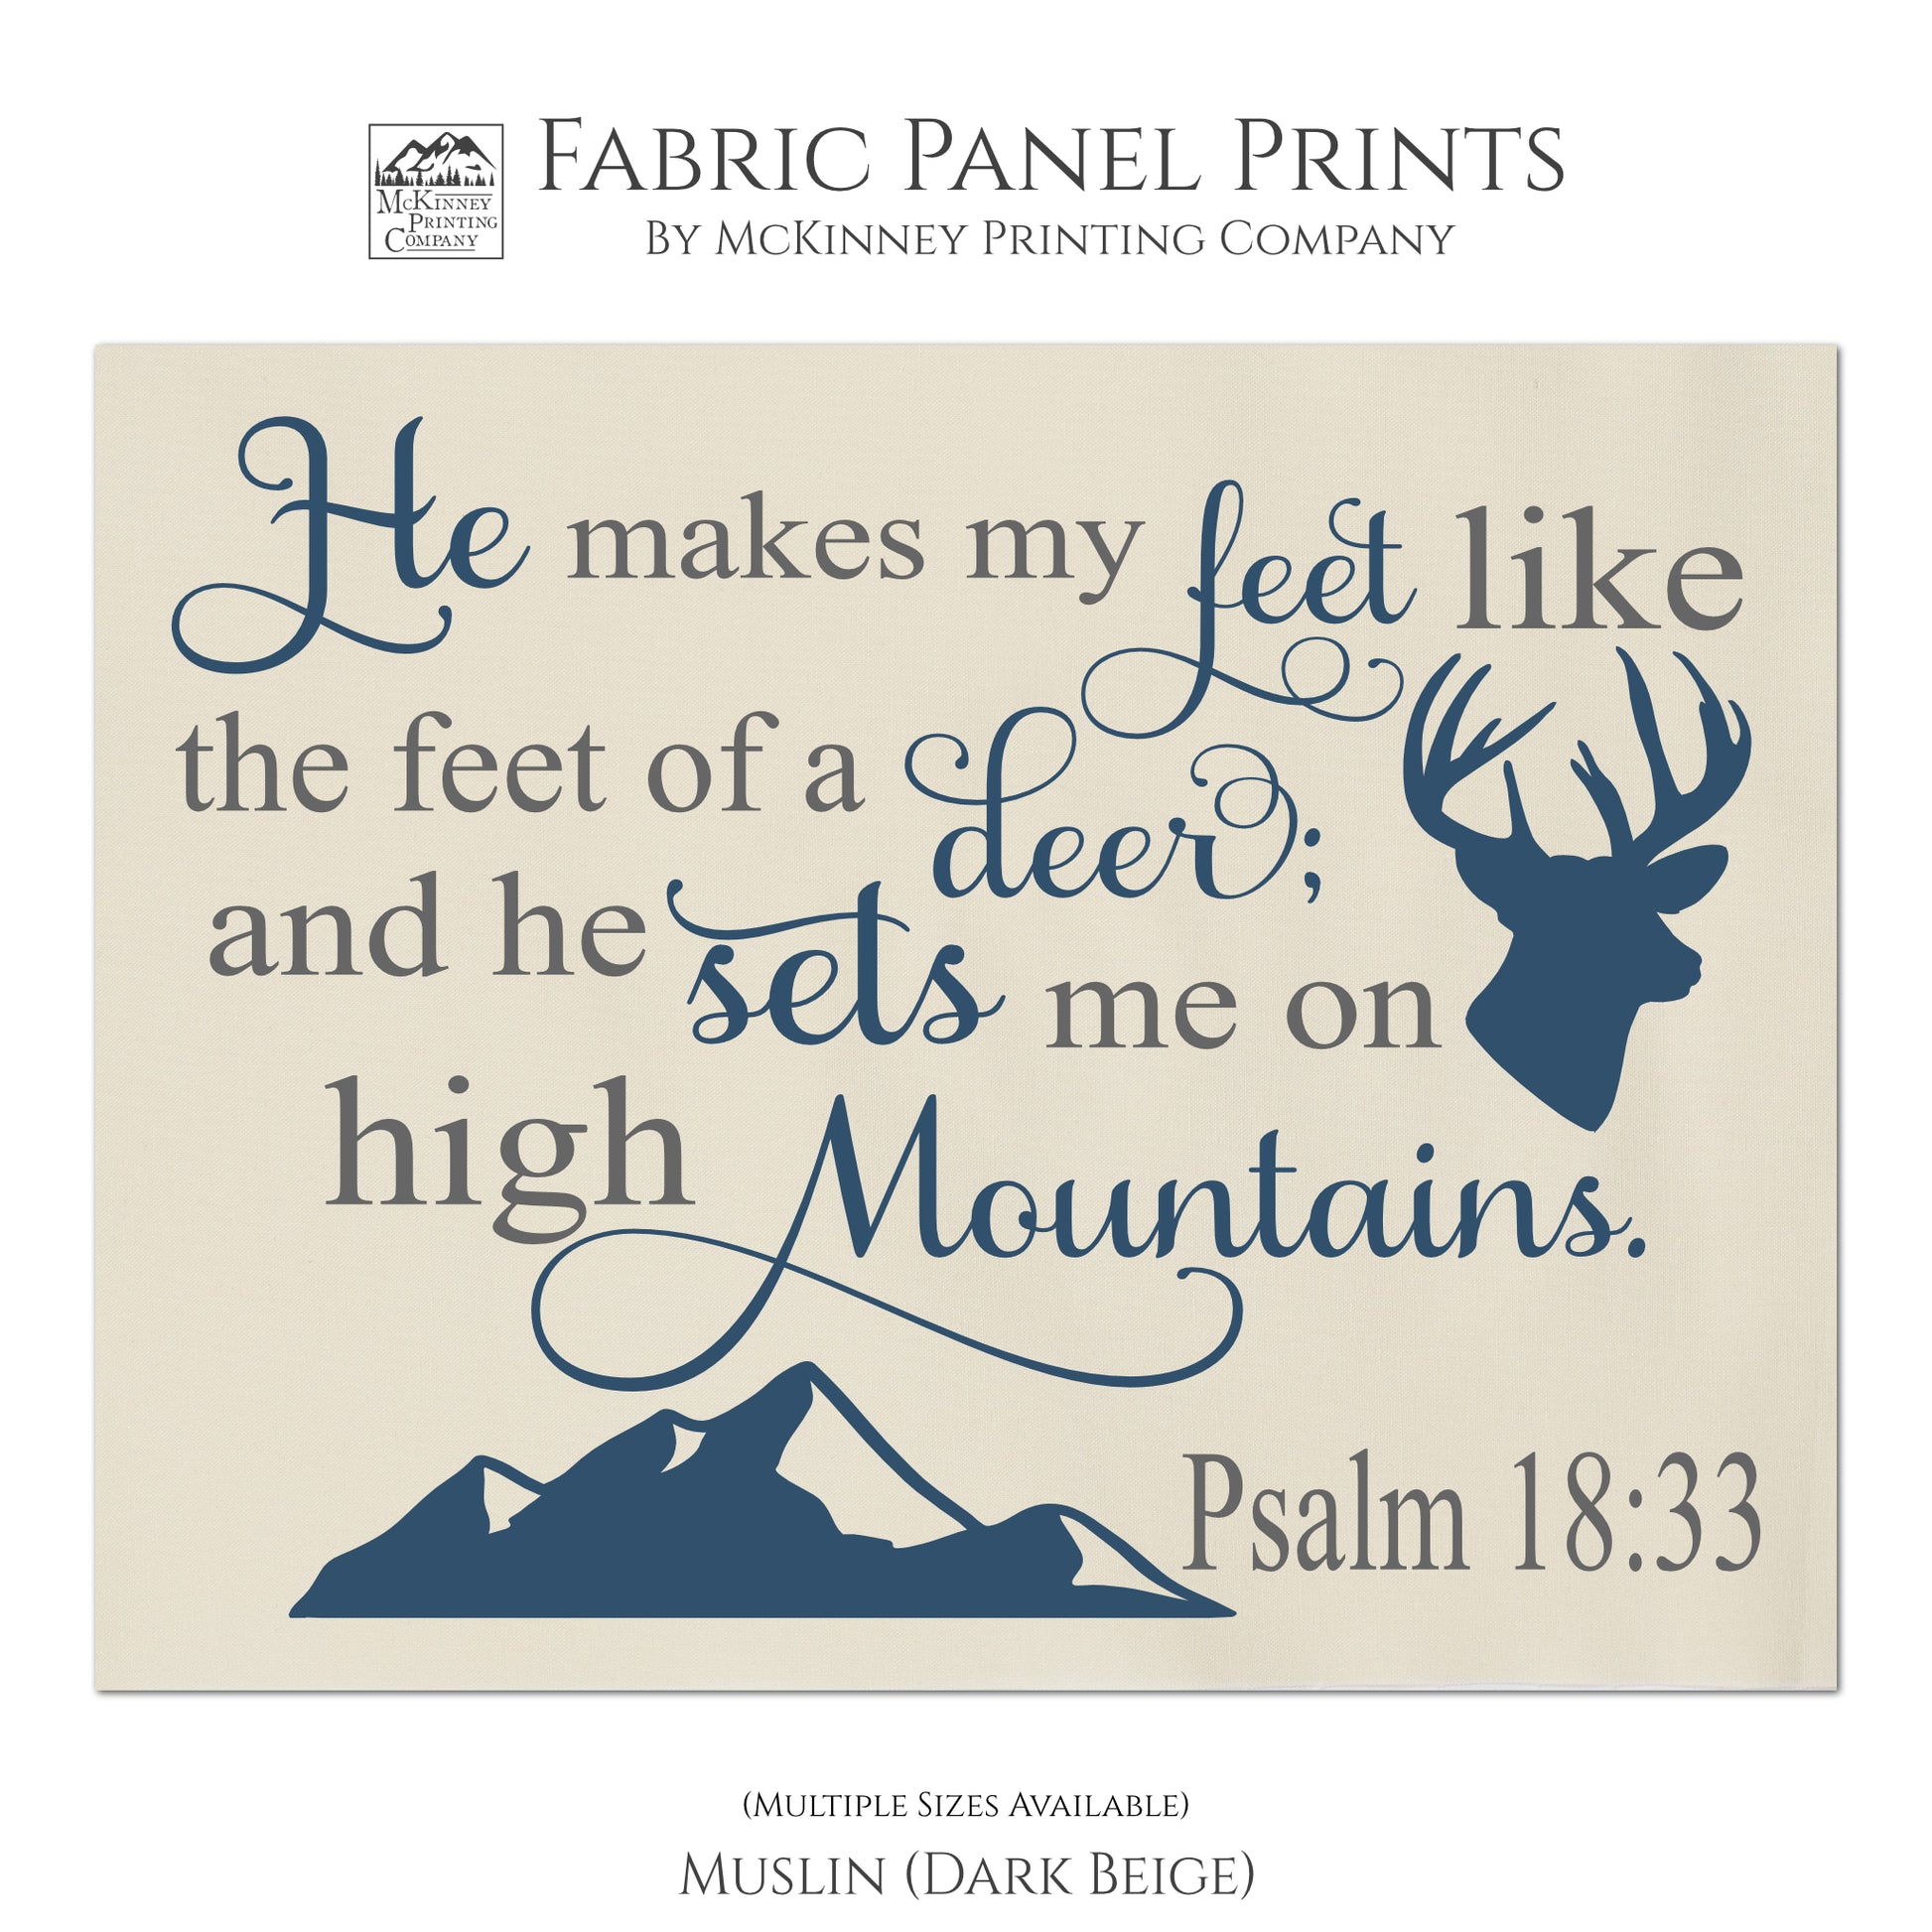 He makes my feet like the feet of a deer; and he sets me on high mountains - Psalm 18:33 - Christian Fabric Panel Print, Quilt Block, Scripture Fabric - Muslin